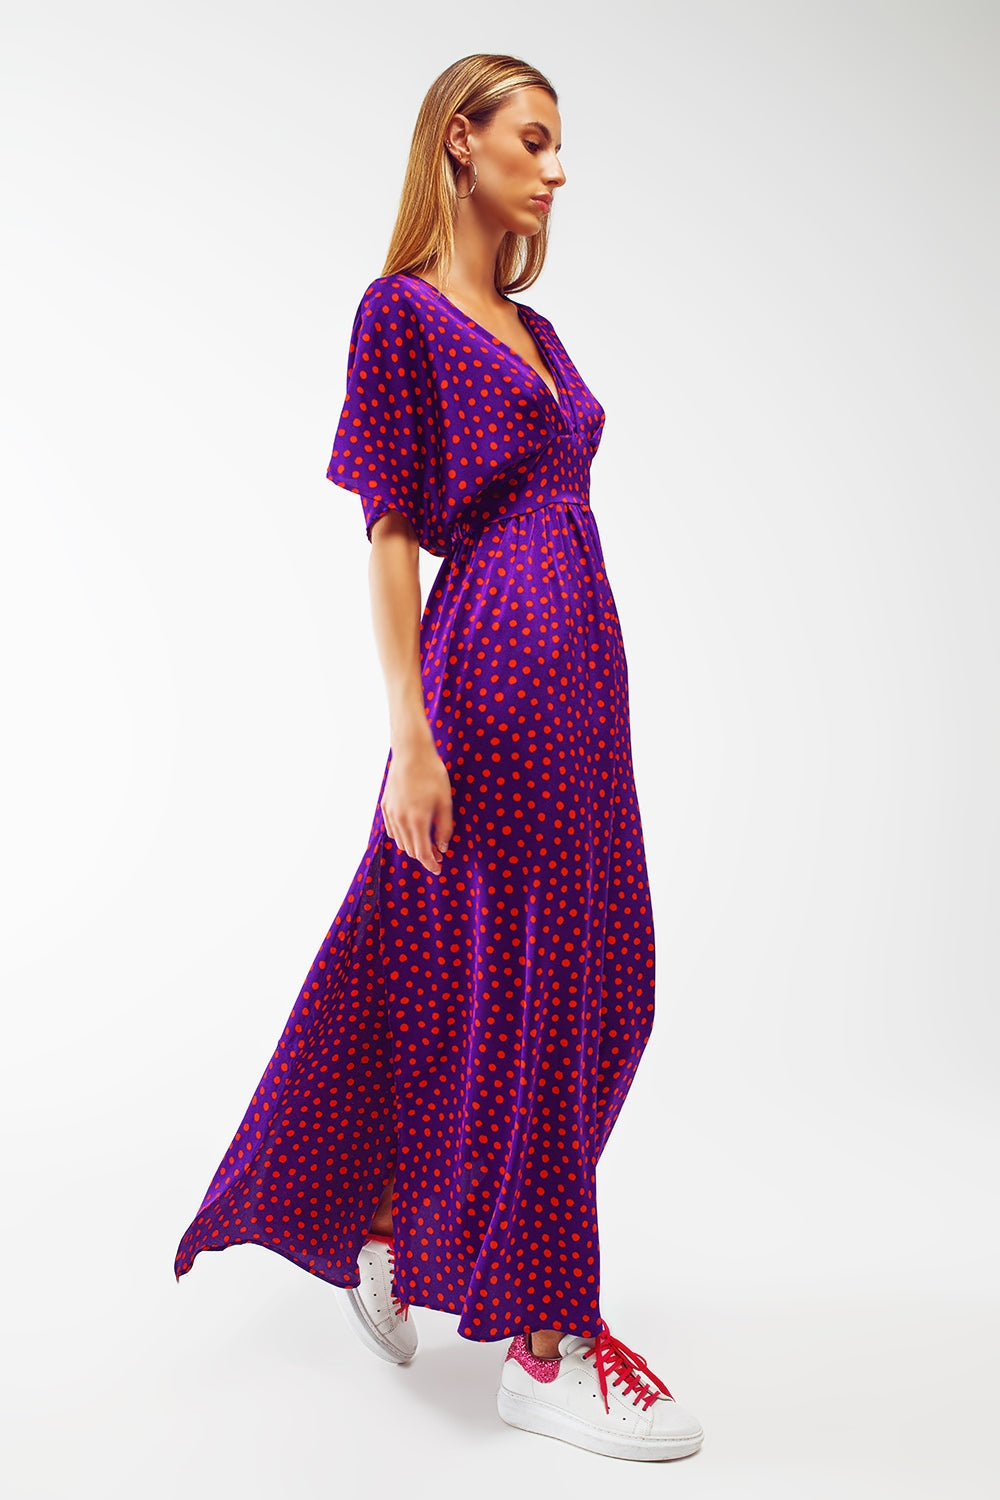 Q2 Maxi Cinched At The Waist Dress With Angel Sleeves In Purple Polka Dot